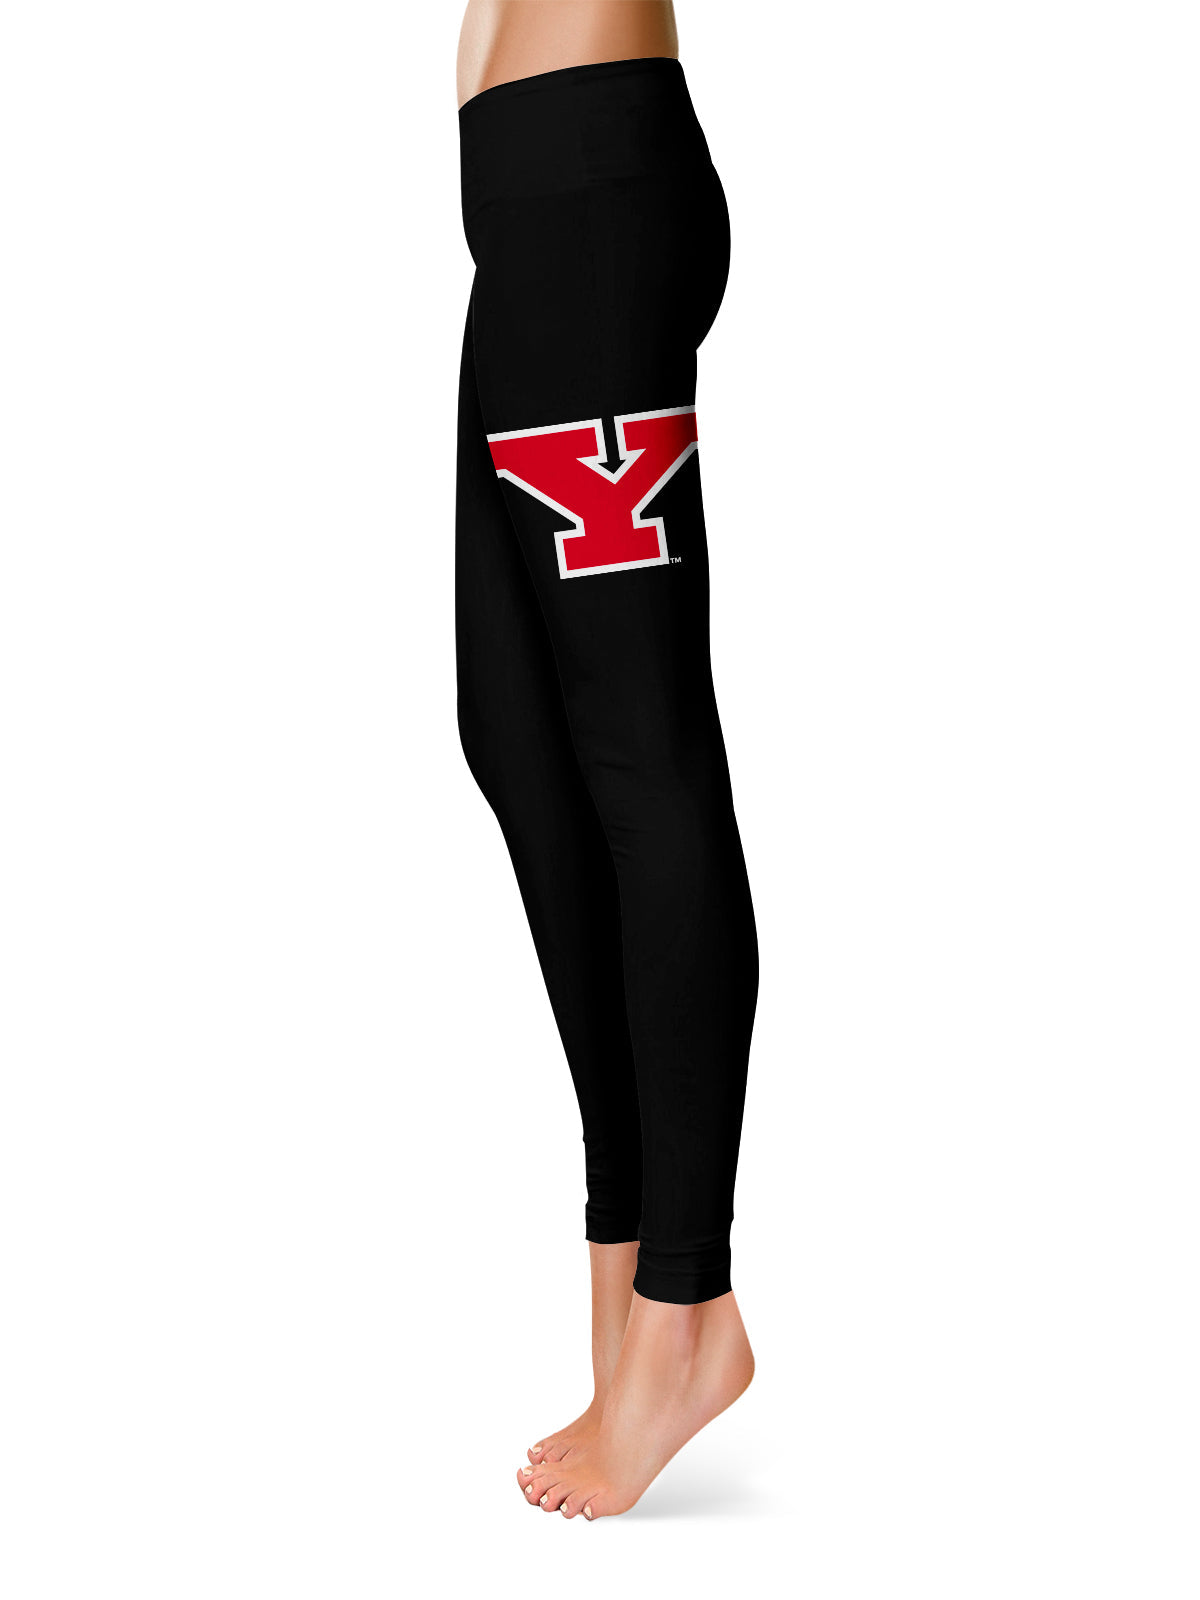 Youngstown State Penguins Large Logo on Thigh Black Yoga Leggings for Women  2.5 Waist Tights